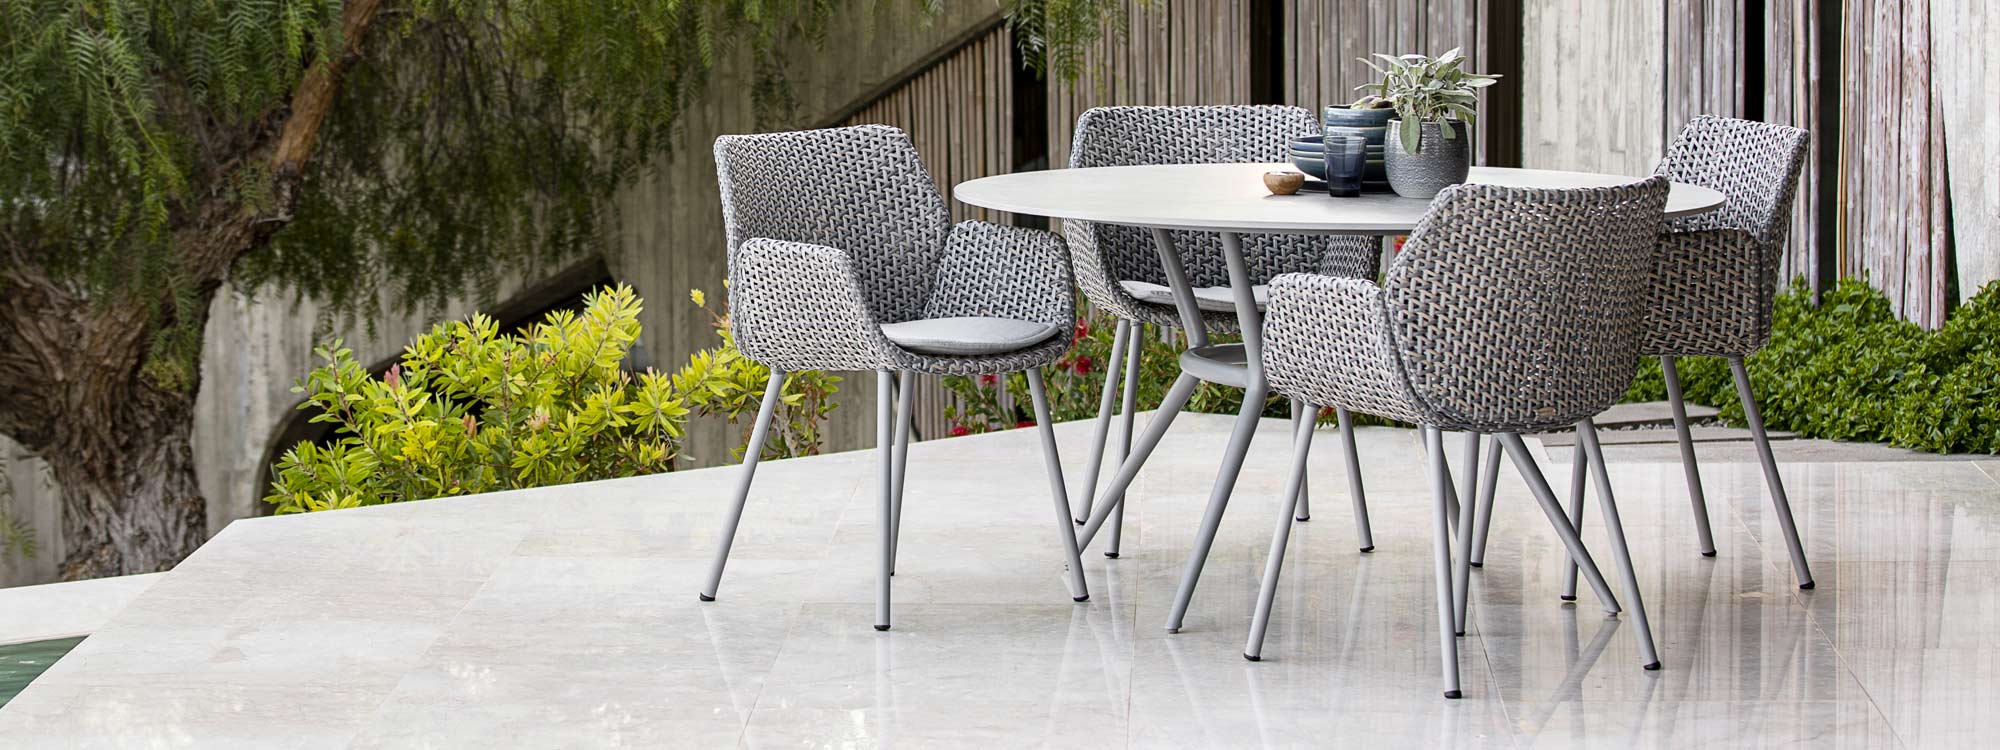 Image of Joy circular dining table and Vibe rattan garden armchairs by Cane-line, shown in sleek outdoor terrace